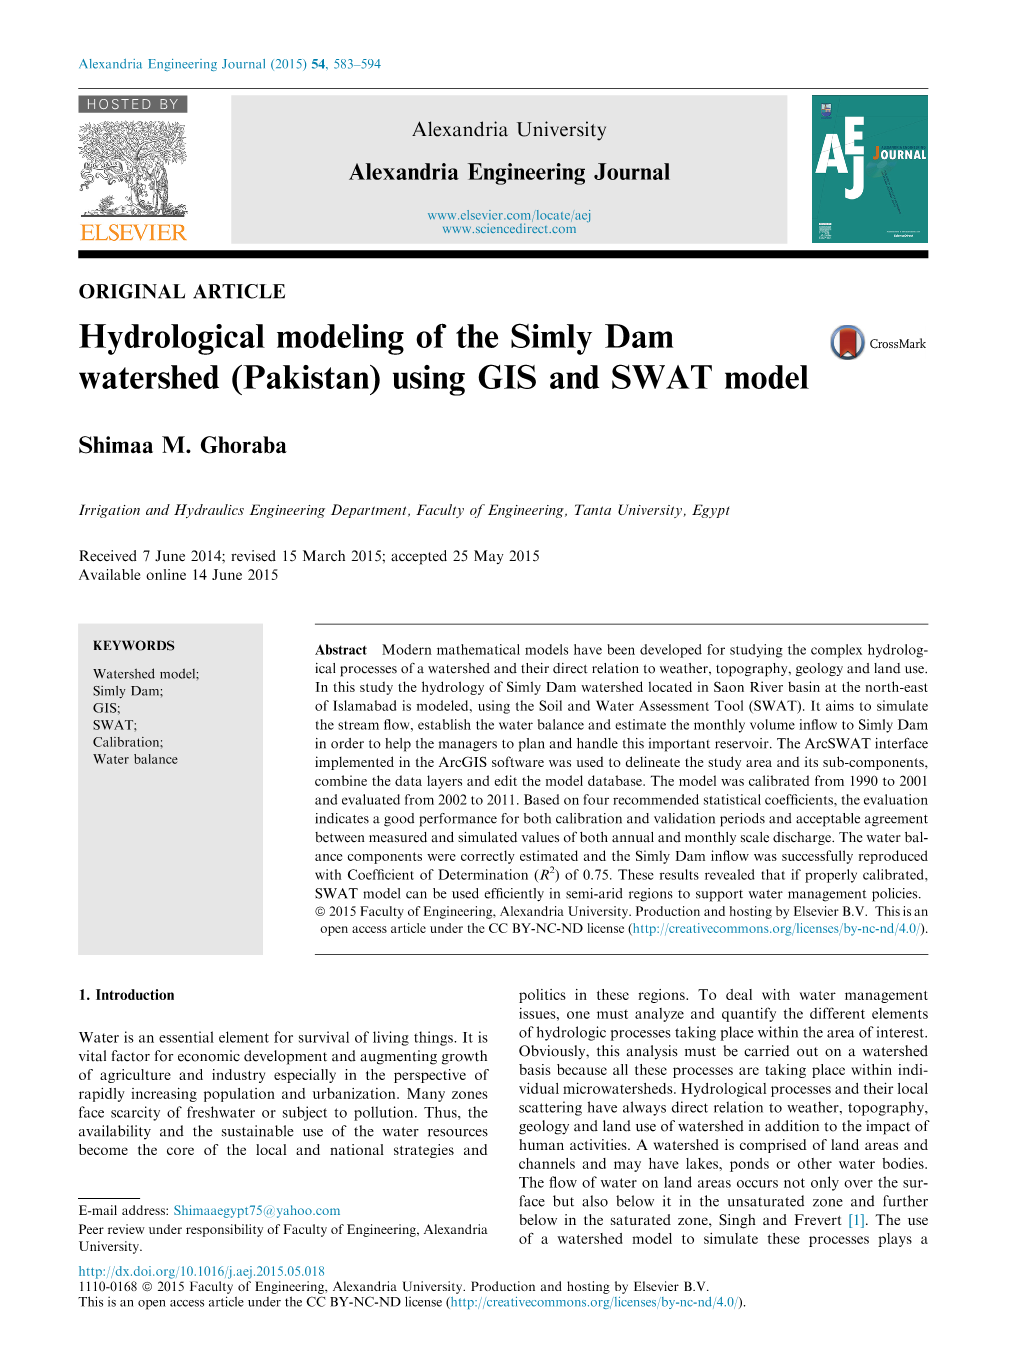 Hydrological Modeling of the Simly Dam Watershed (Pakistan) Using GIS and SWAT Model